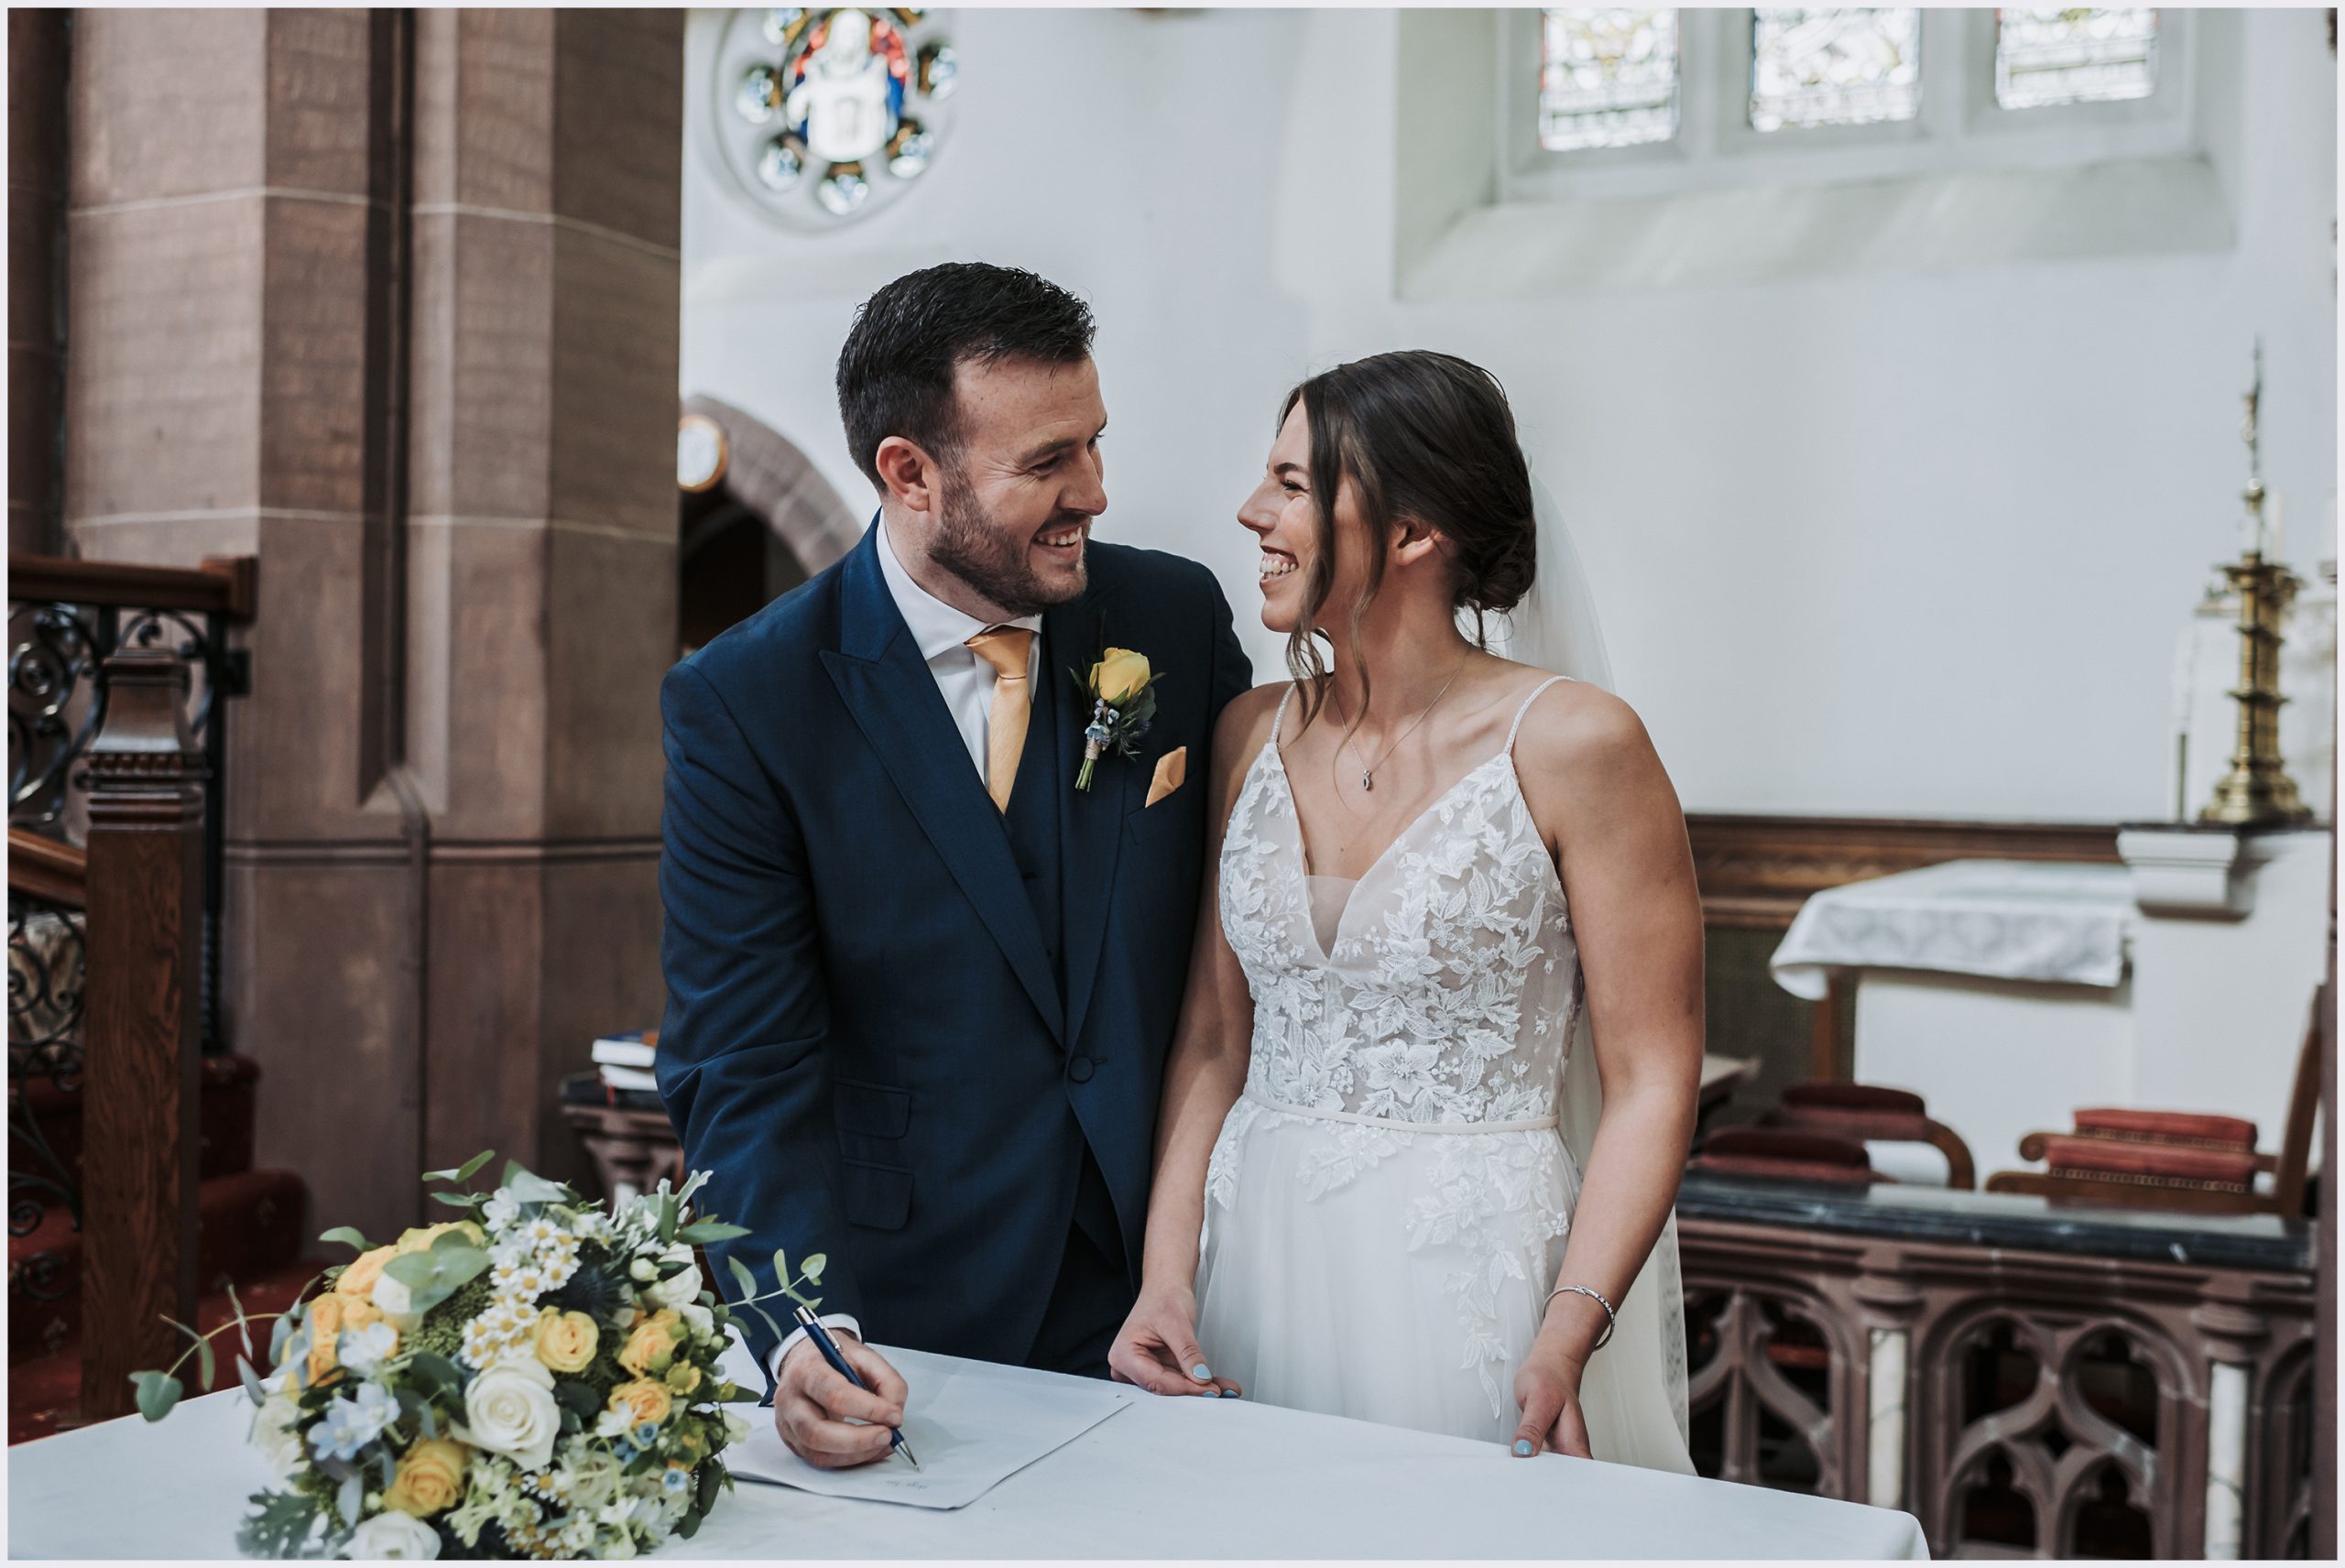 A bride and groom smile at each other after signing the register in a church in Chester